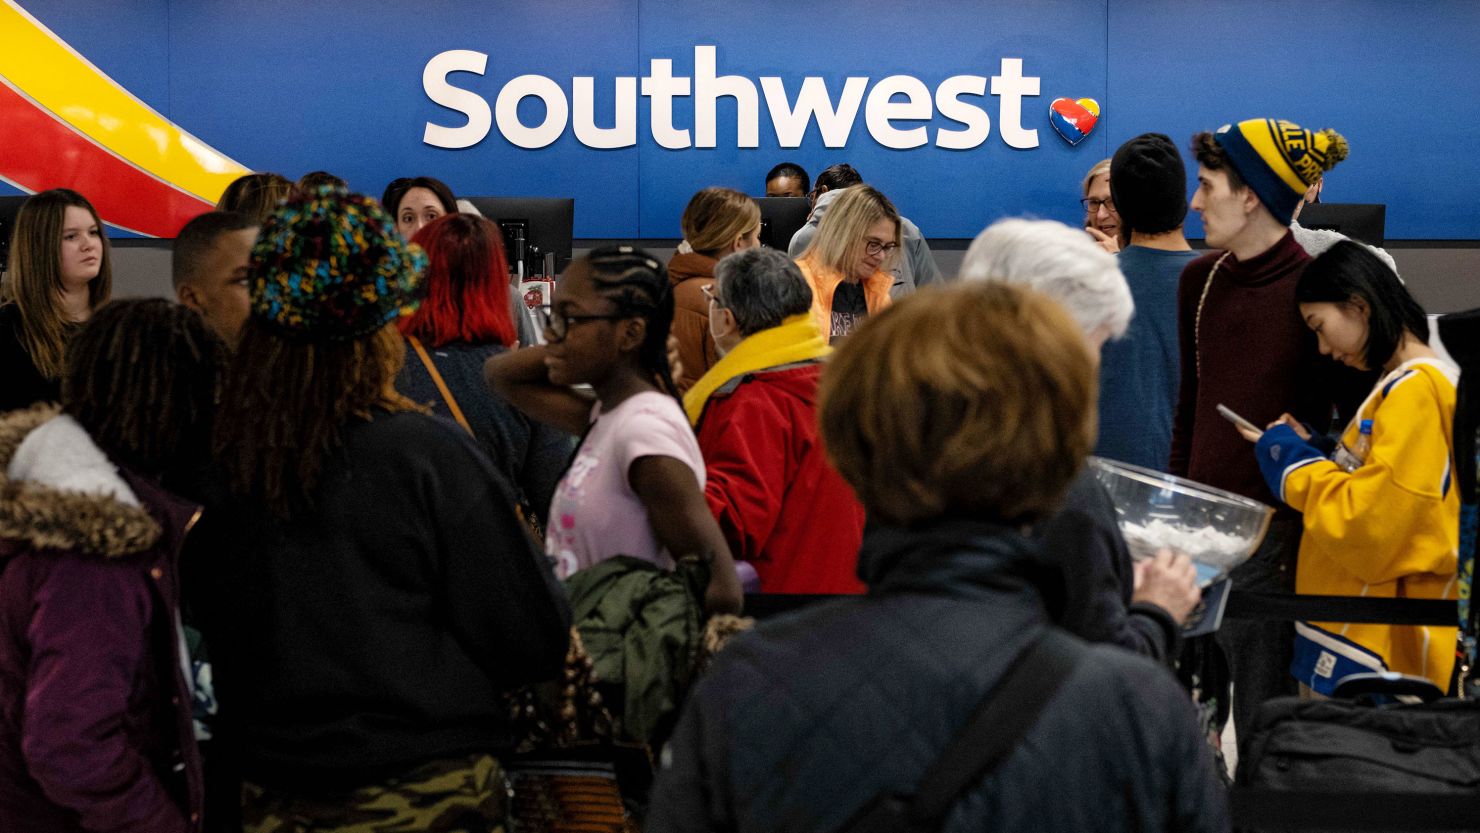 Travelers wait in line at the Southwest Airlines ticketing counter at Nashville International Airport (Seth Herald / AFP)